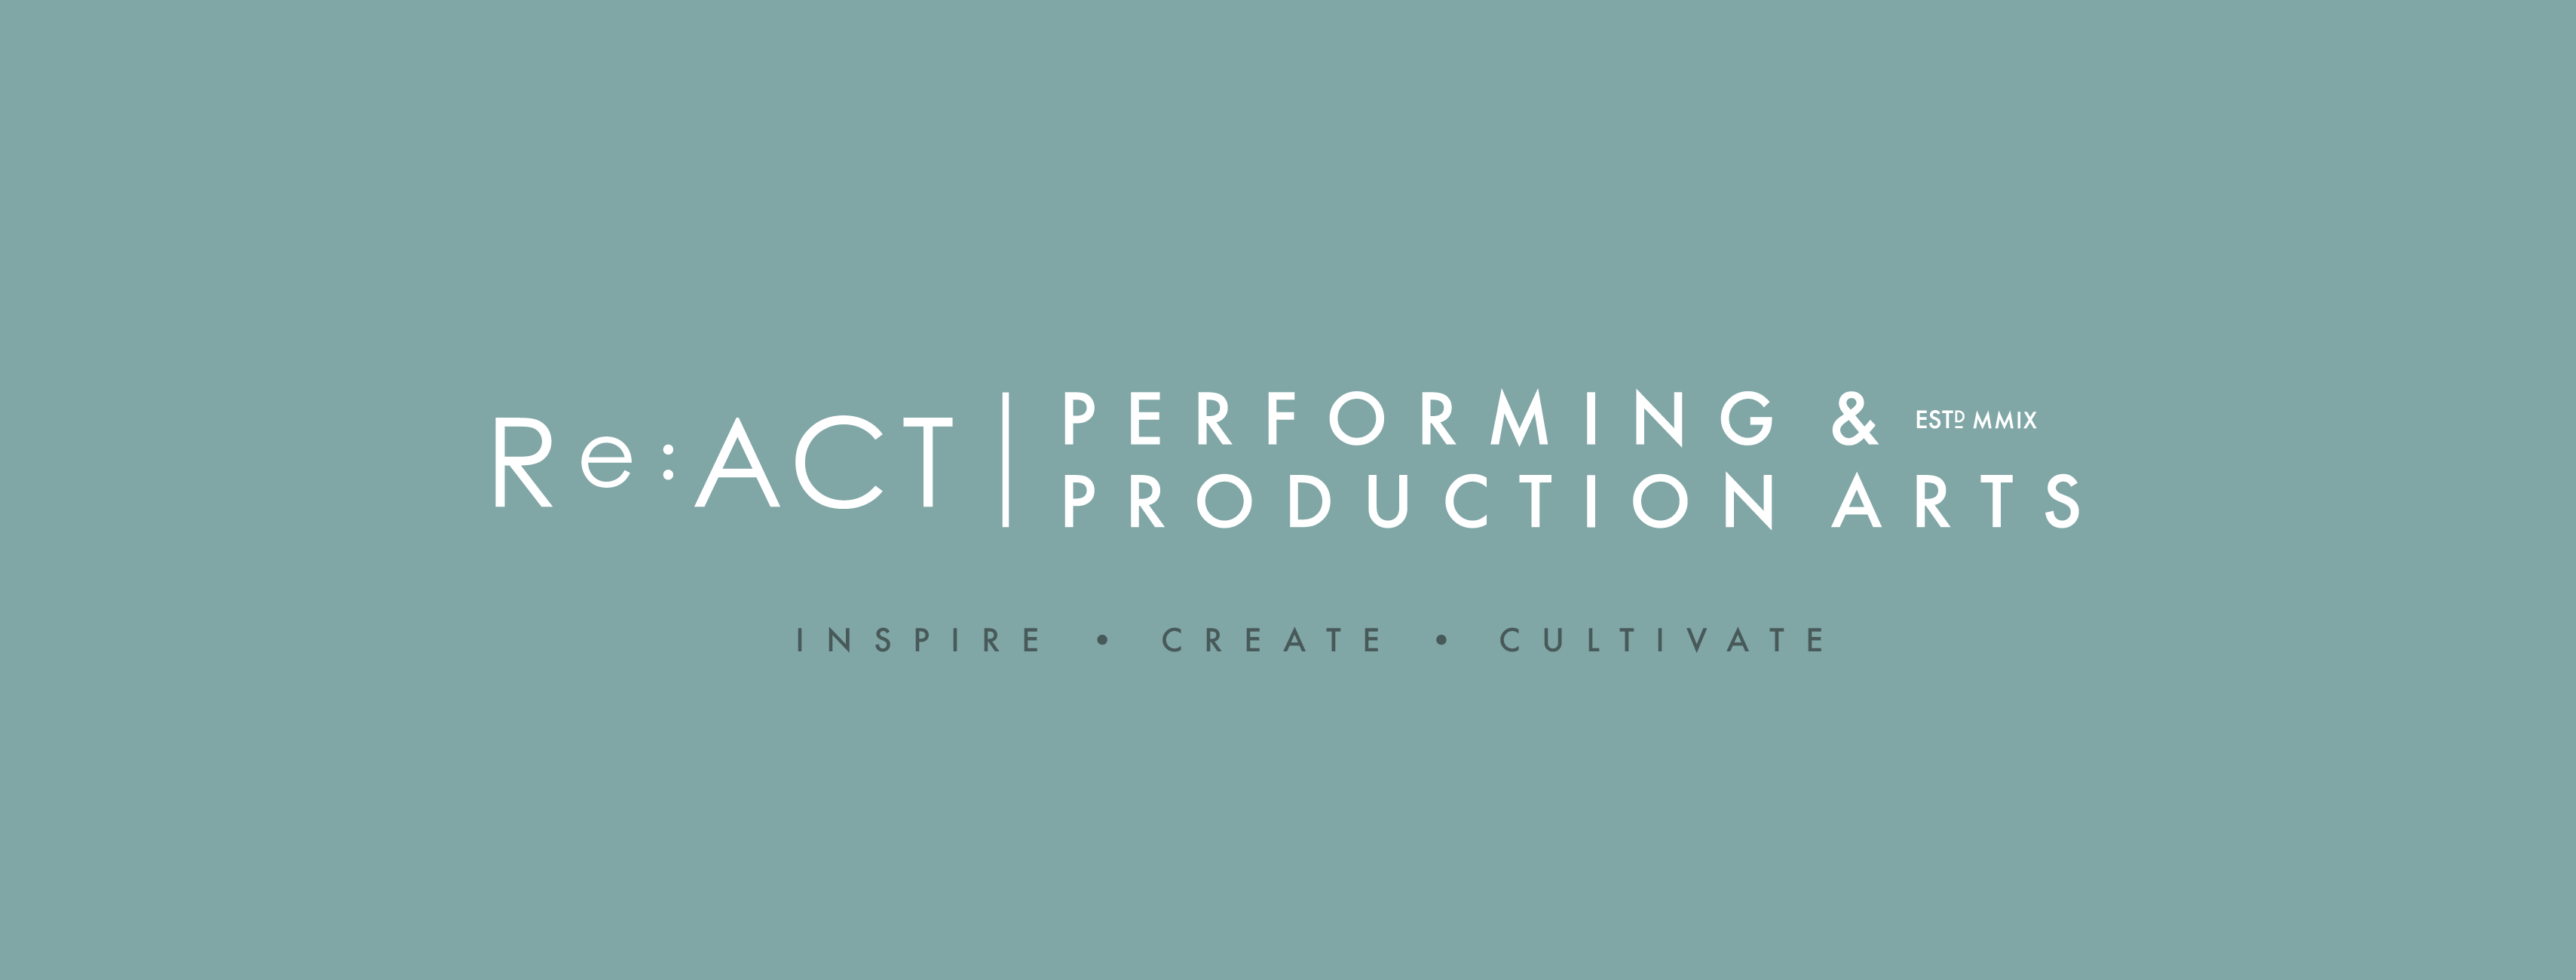 Re:ACT Performing & Production Arts